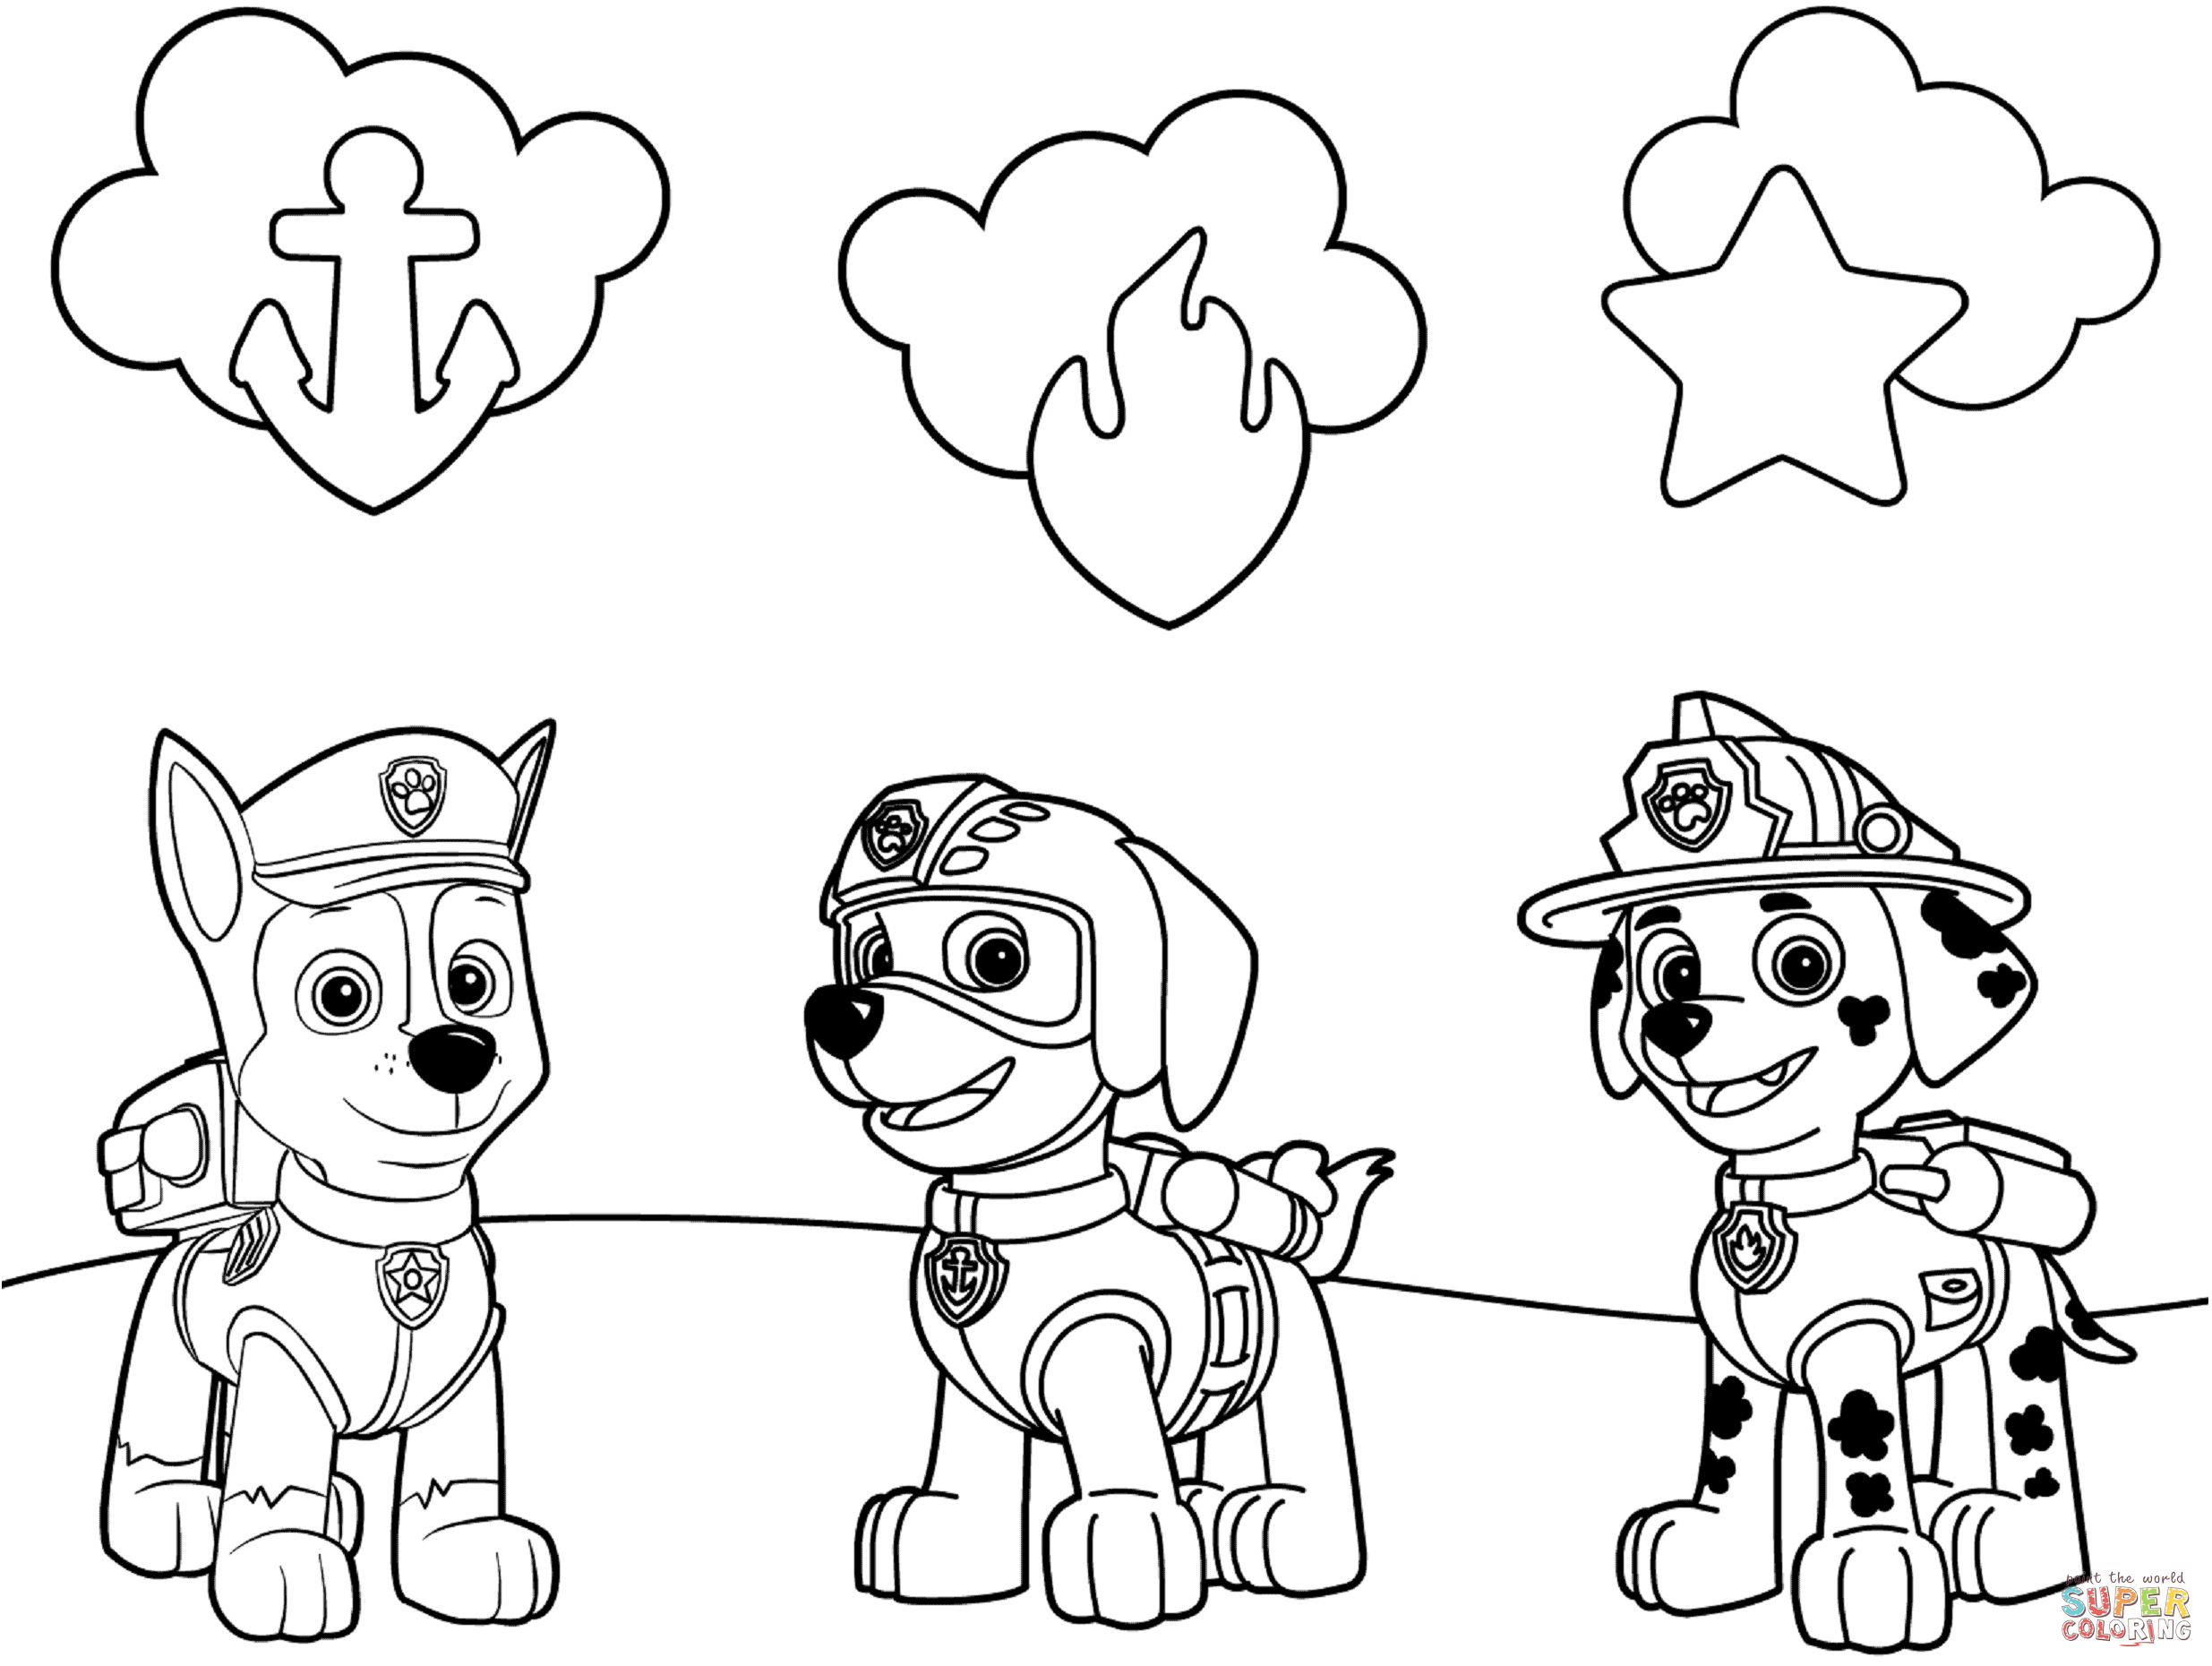 free-printable-paw-patrol-coloring-pages-download-free-printable-paw-patrol-coloring-pages-png